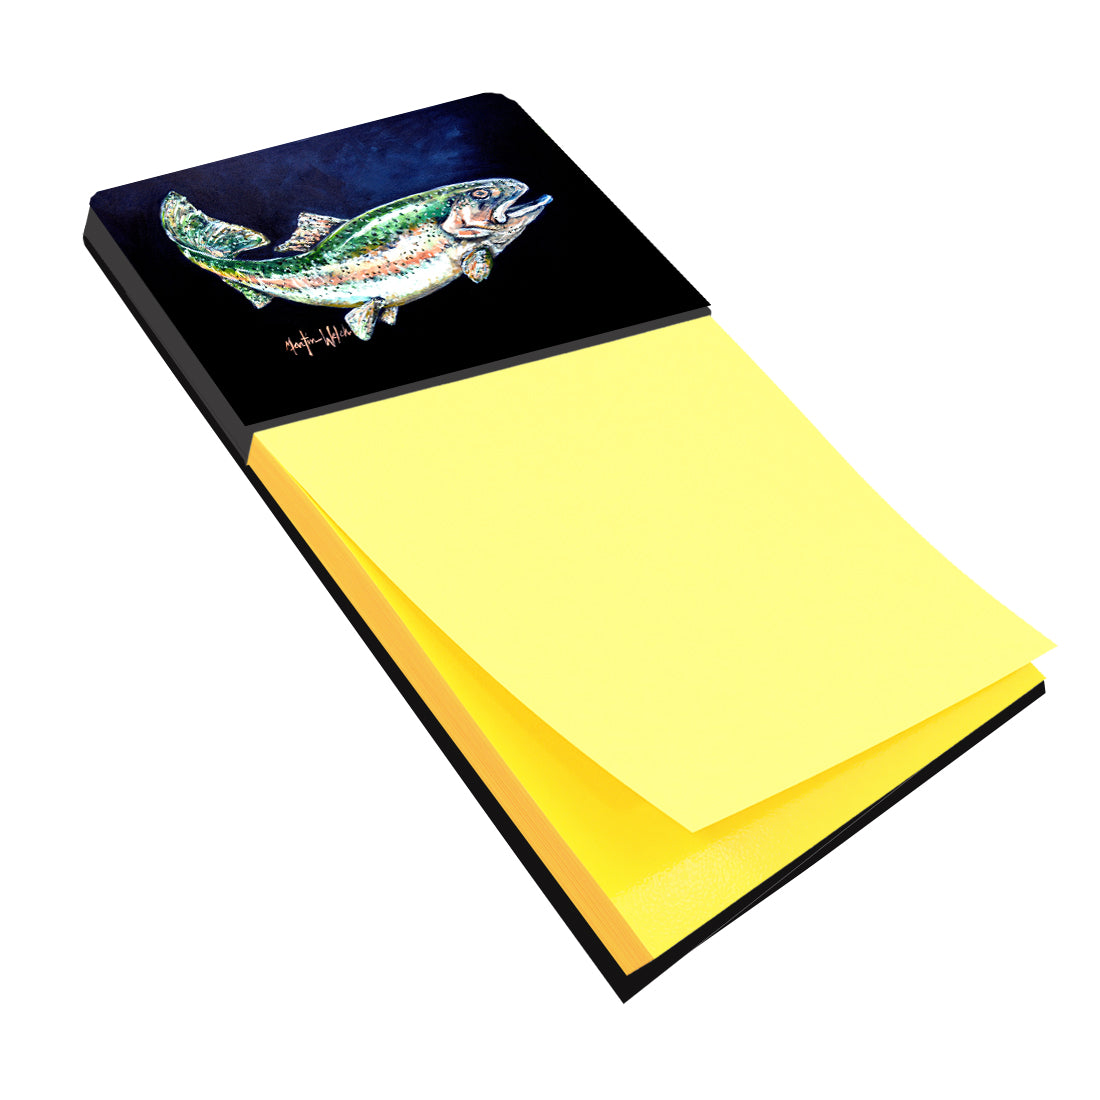 Buy this Deep Blue Rainbow Trout Sticky Note Holder